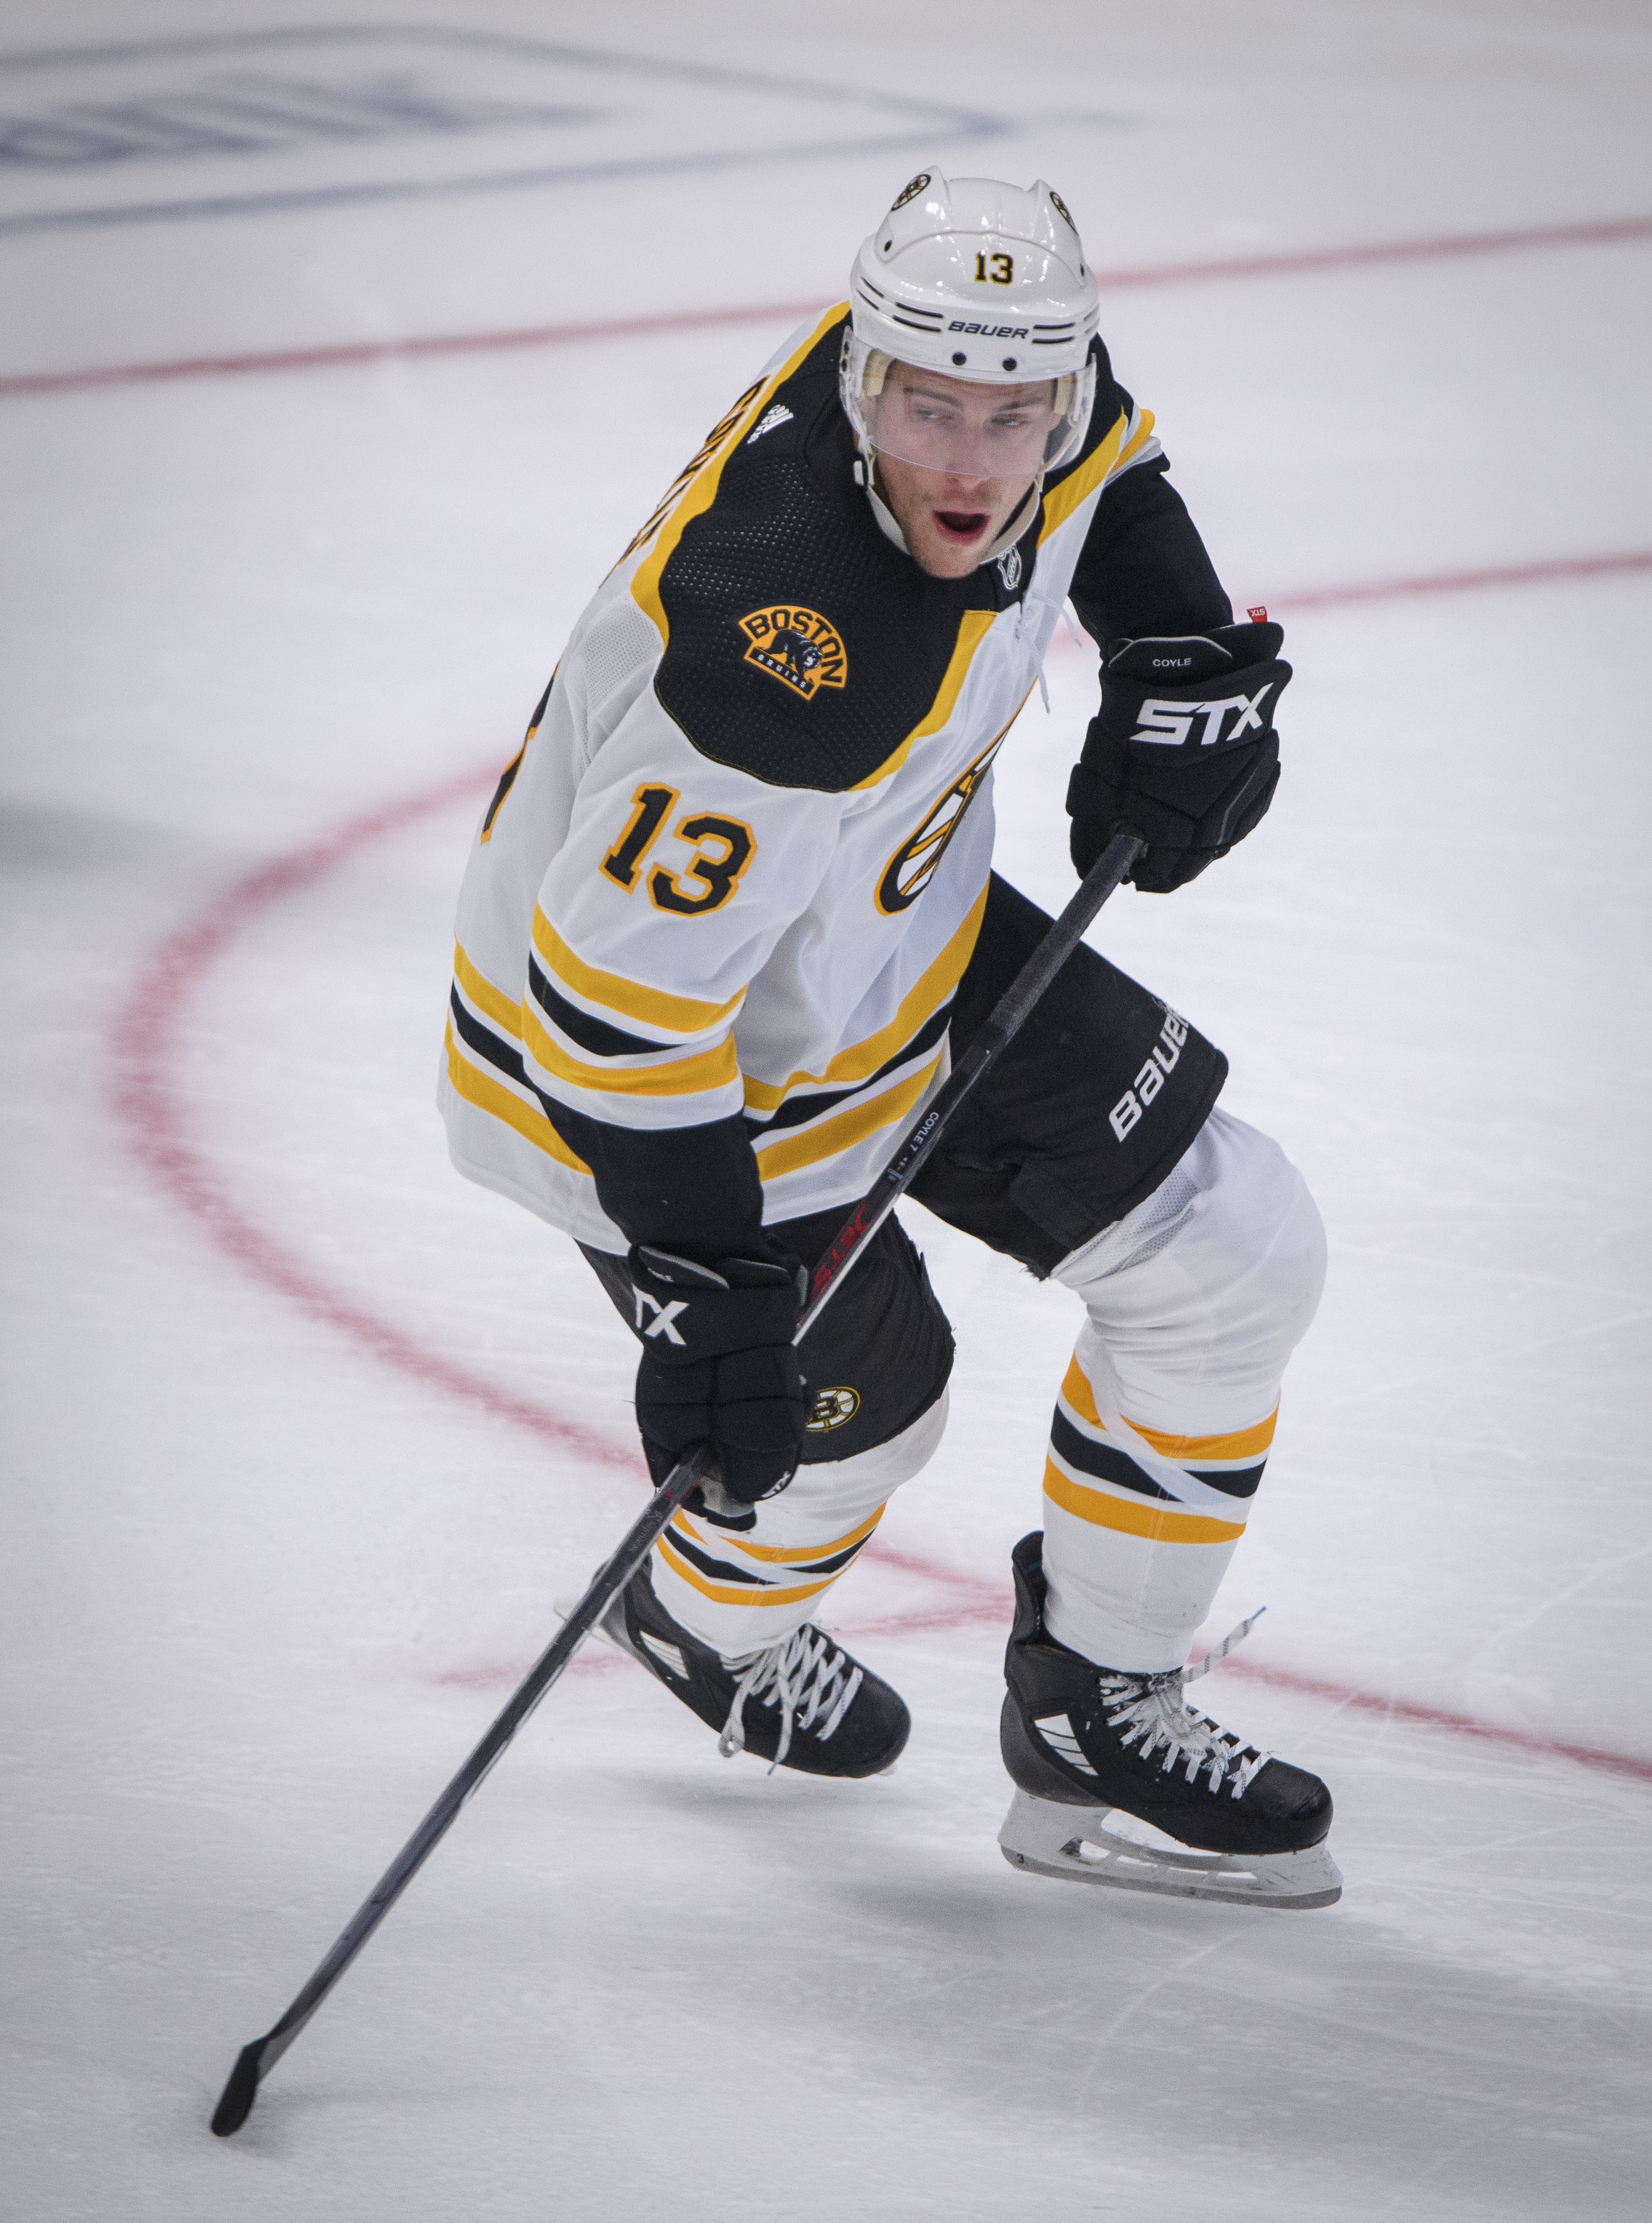 Report: Bruins in talks to extend 'core guy' Marchand